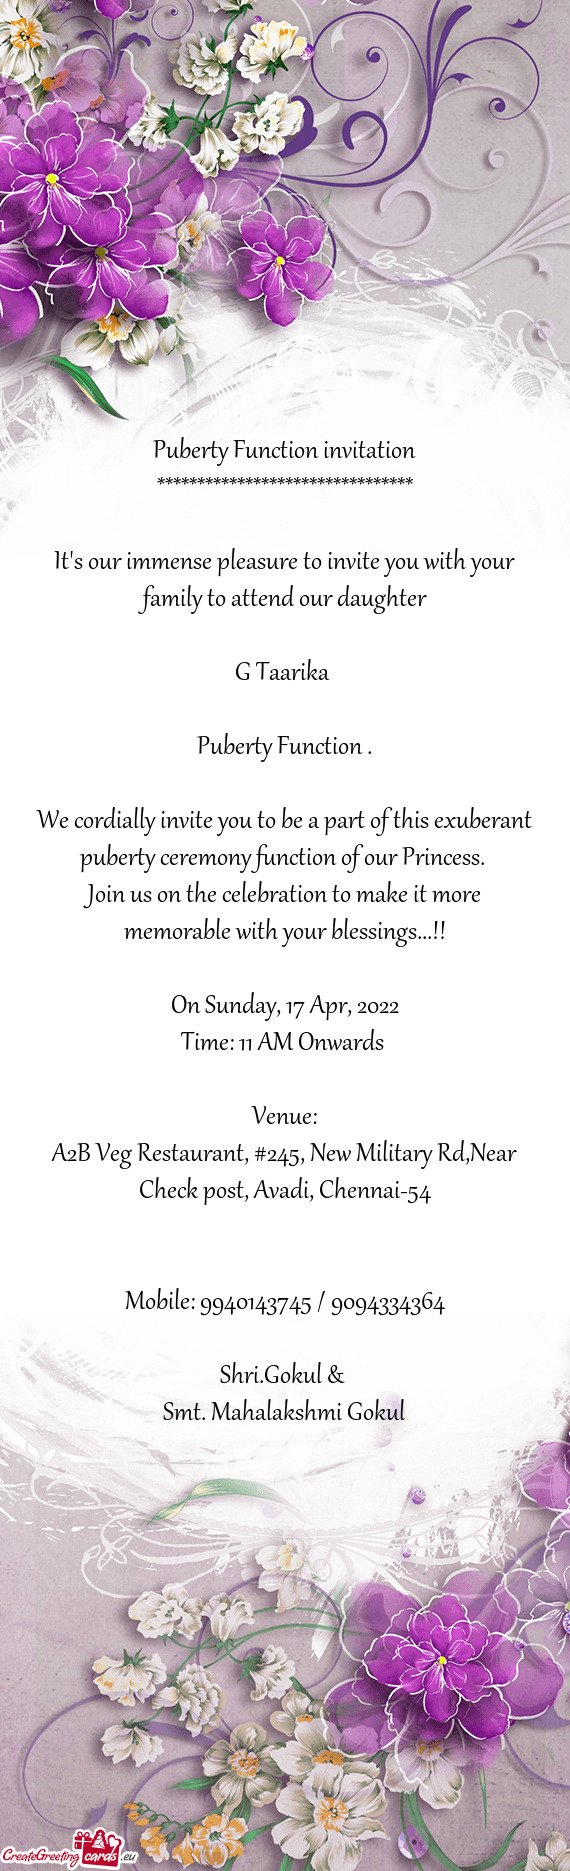 We cordially invite you to be a part of this exuberant puberty ceremony function of our Princess